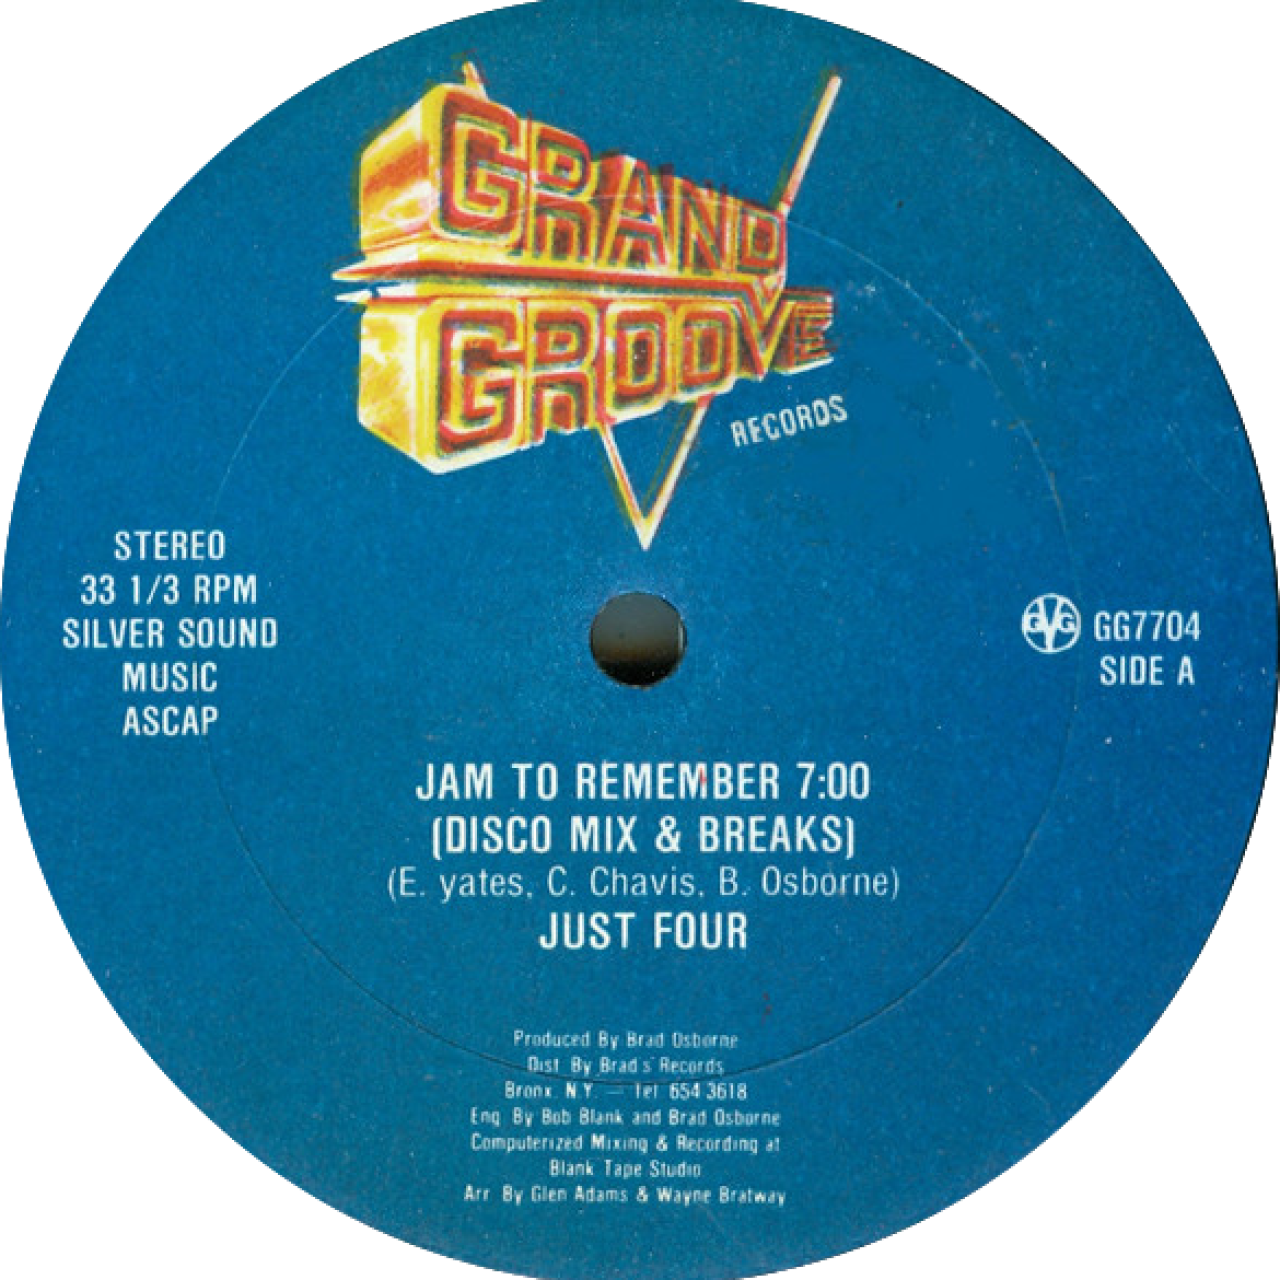 Just Four - Jam to Remember